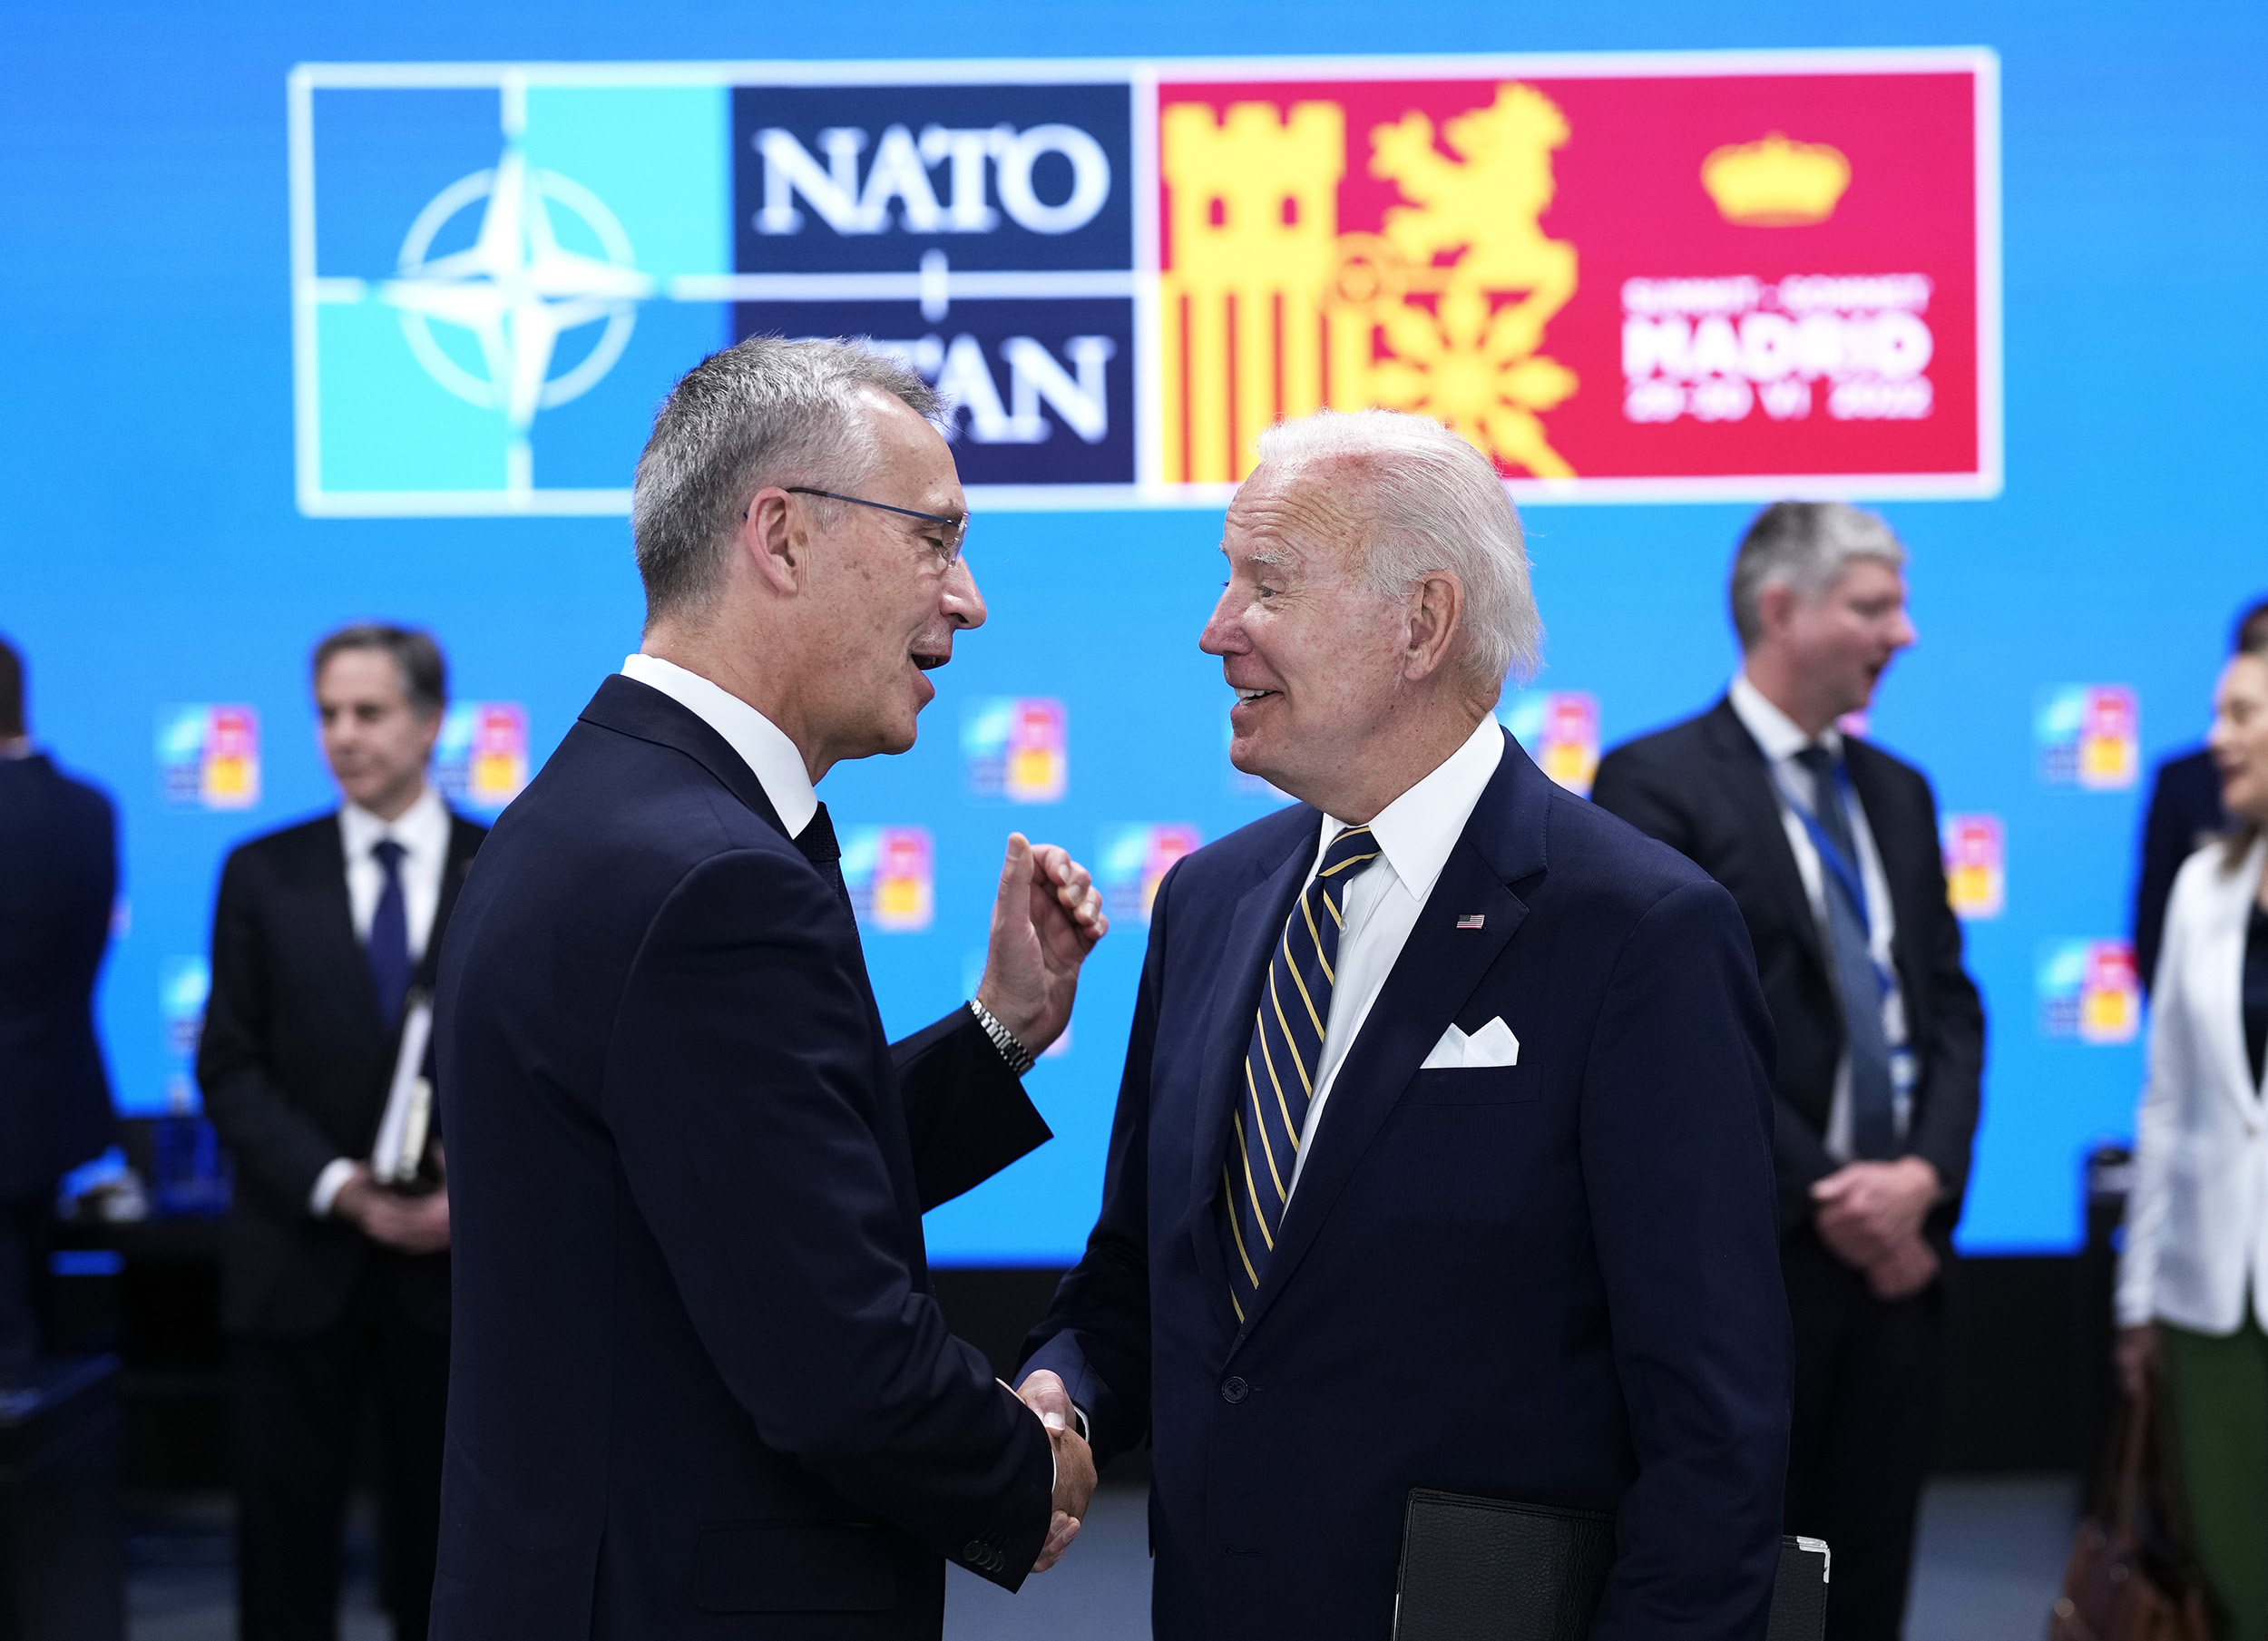 NATO Secretary General Jens Stoltenberg, left, speaks with U.S. President Joe Biden during a round table meeting at a NATO summit in Madrid, Spain, on June 30.